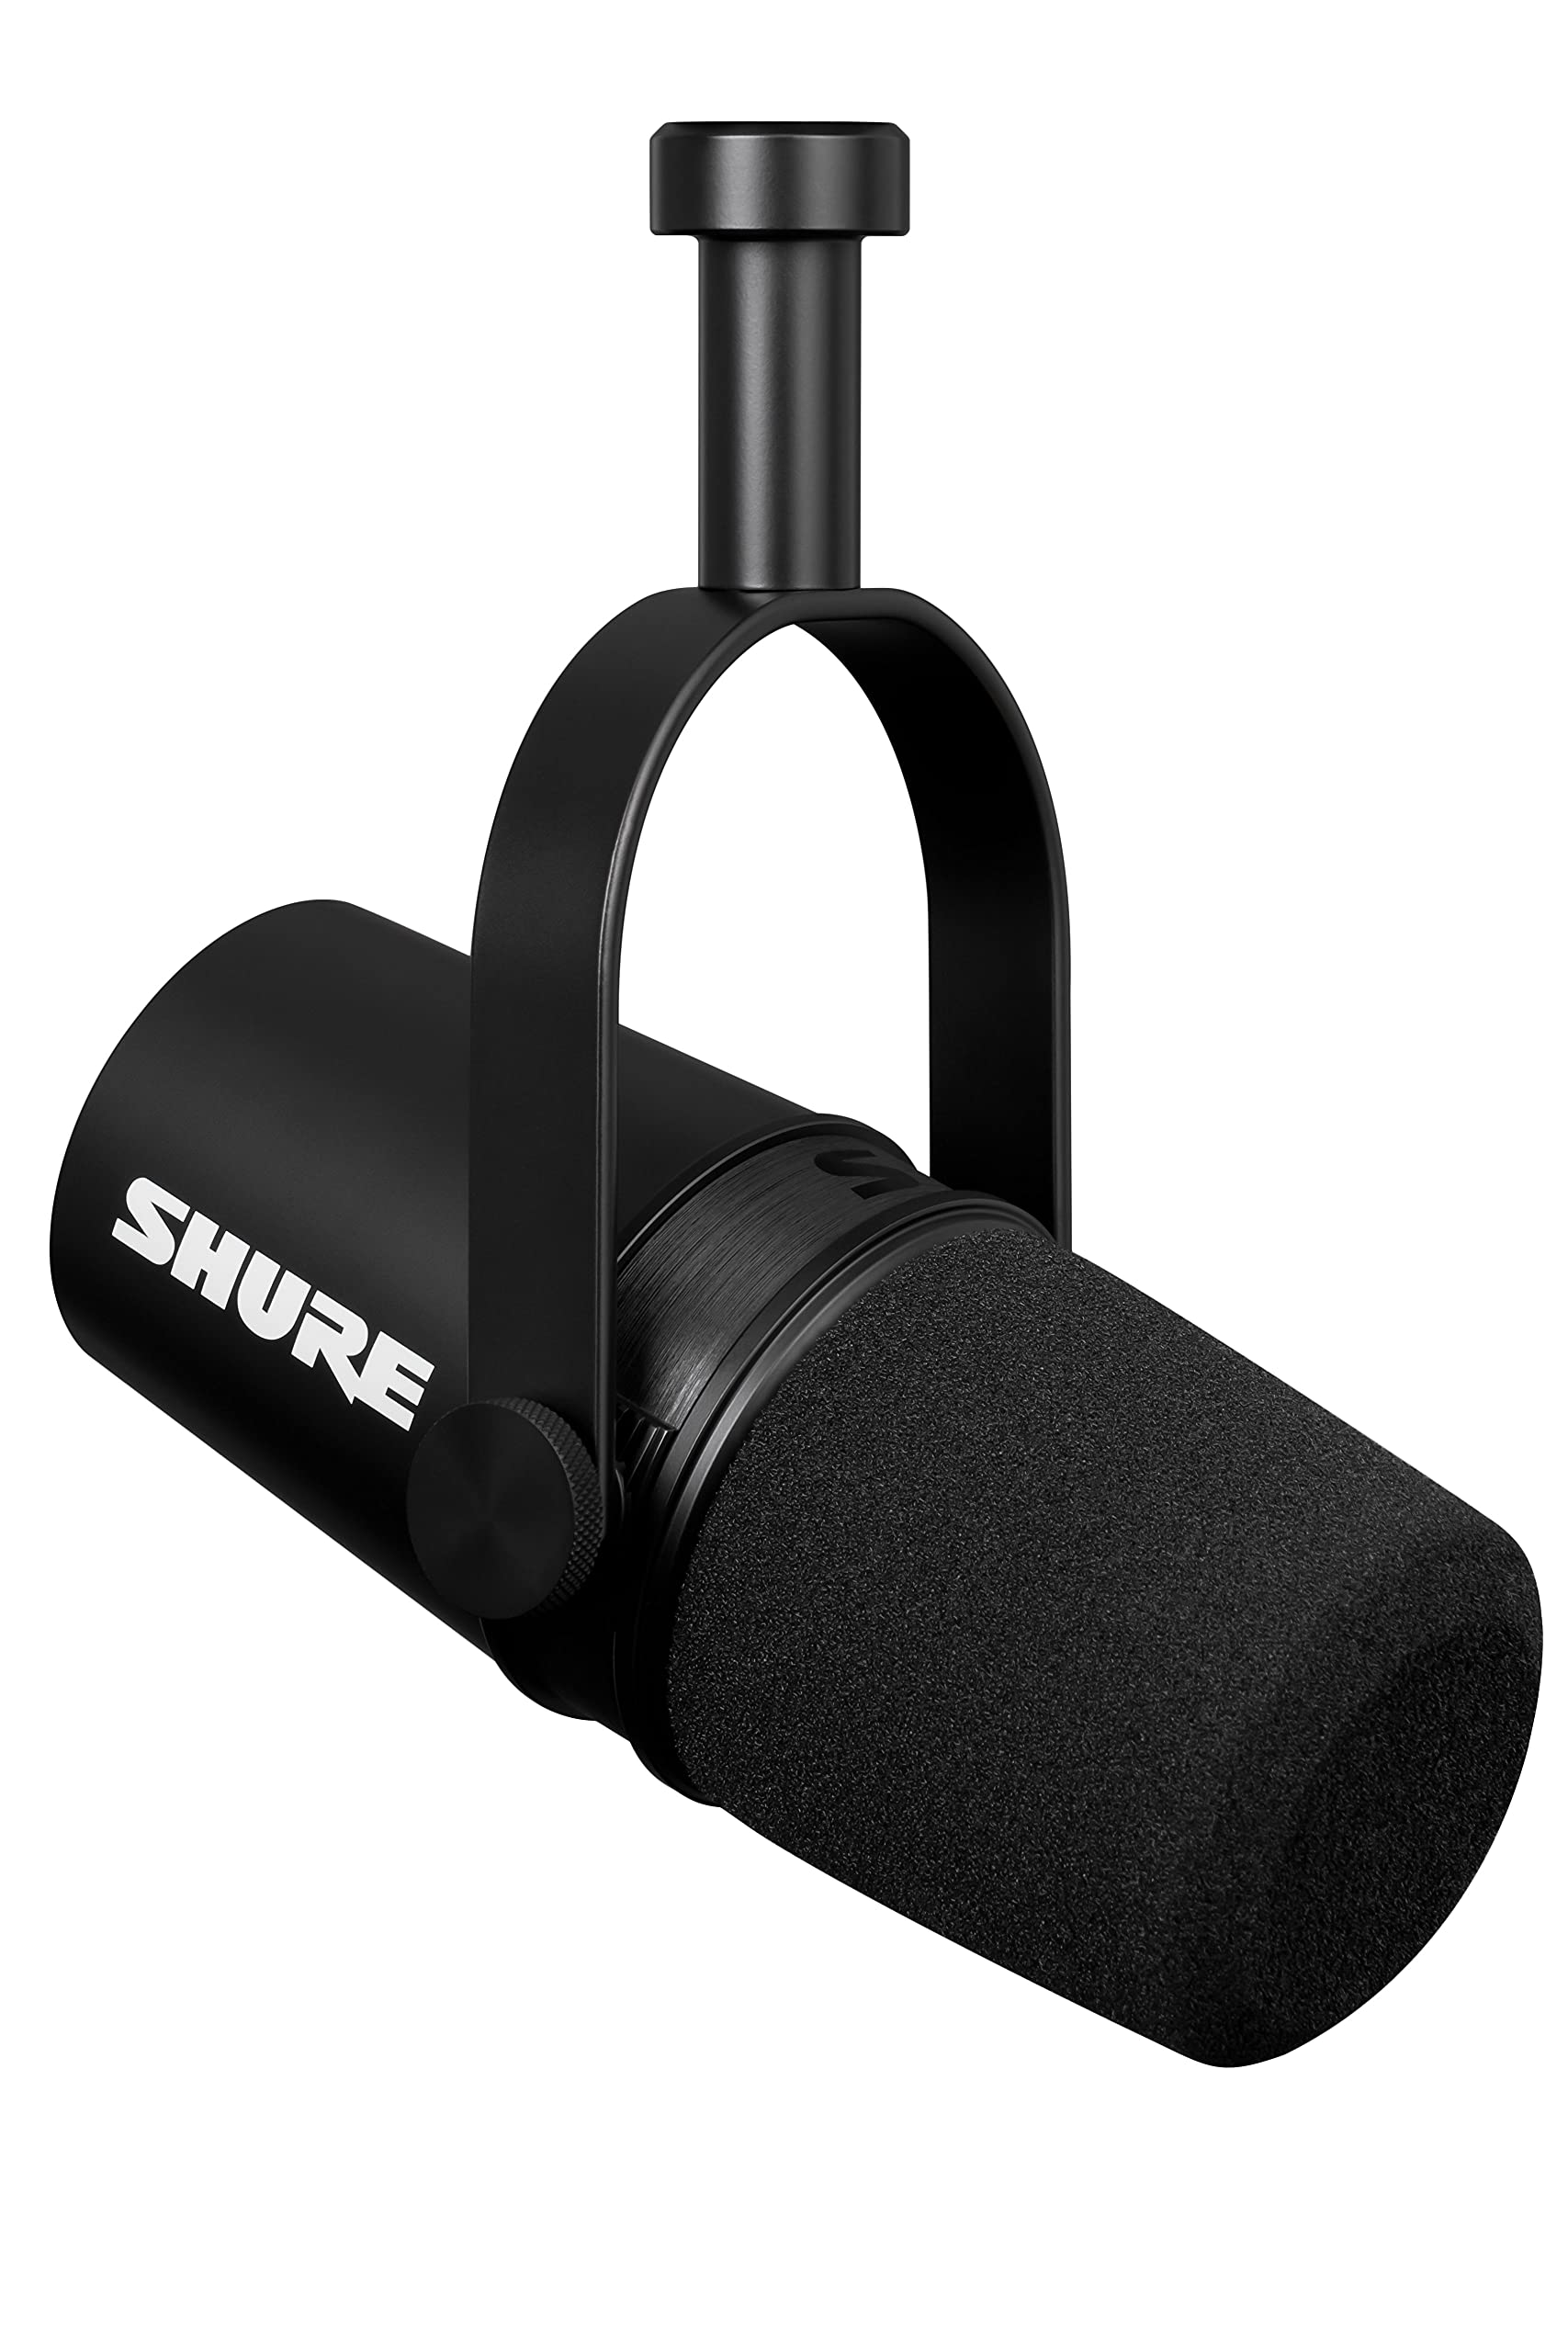 Shure MV7 USB Microphone with Tripod, for Podcasting, Recording, Streaming & Gaming, Built-In Headphone Output, All Metal USB/XLR Dynamic Mic, Voice-Isolating Tech - Black (Official KSA Version)